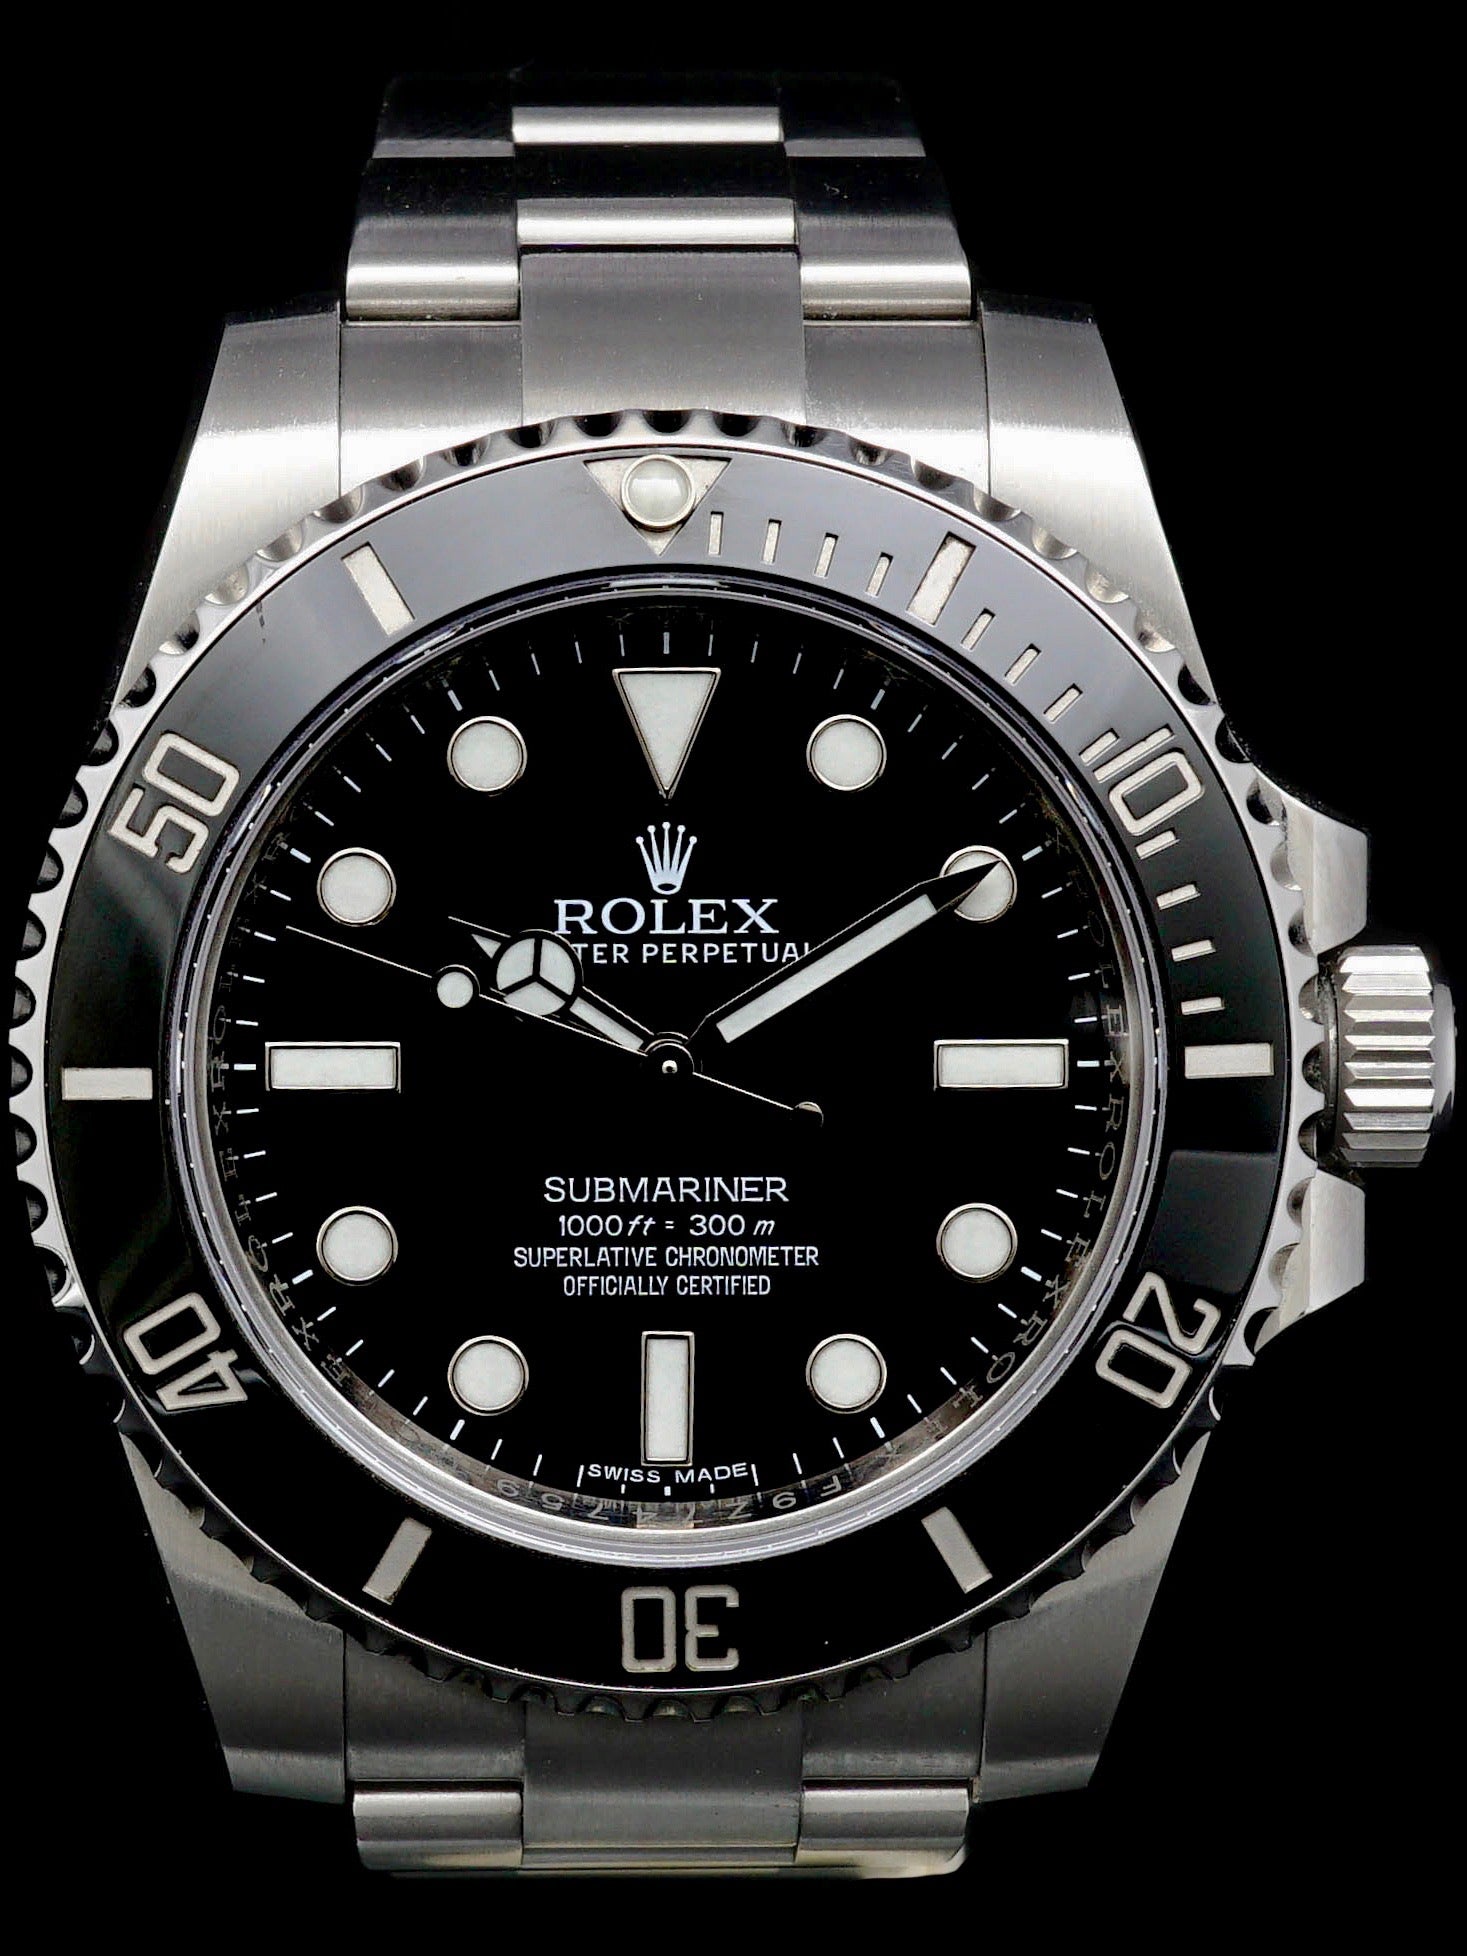 2015 Rolex Submariner (Ref. 114060) w/ Box and Papers